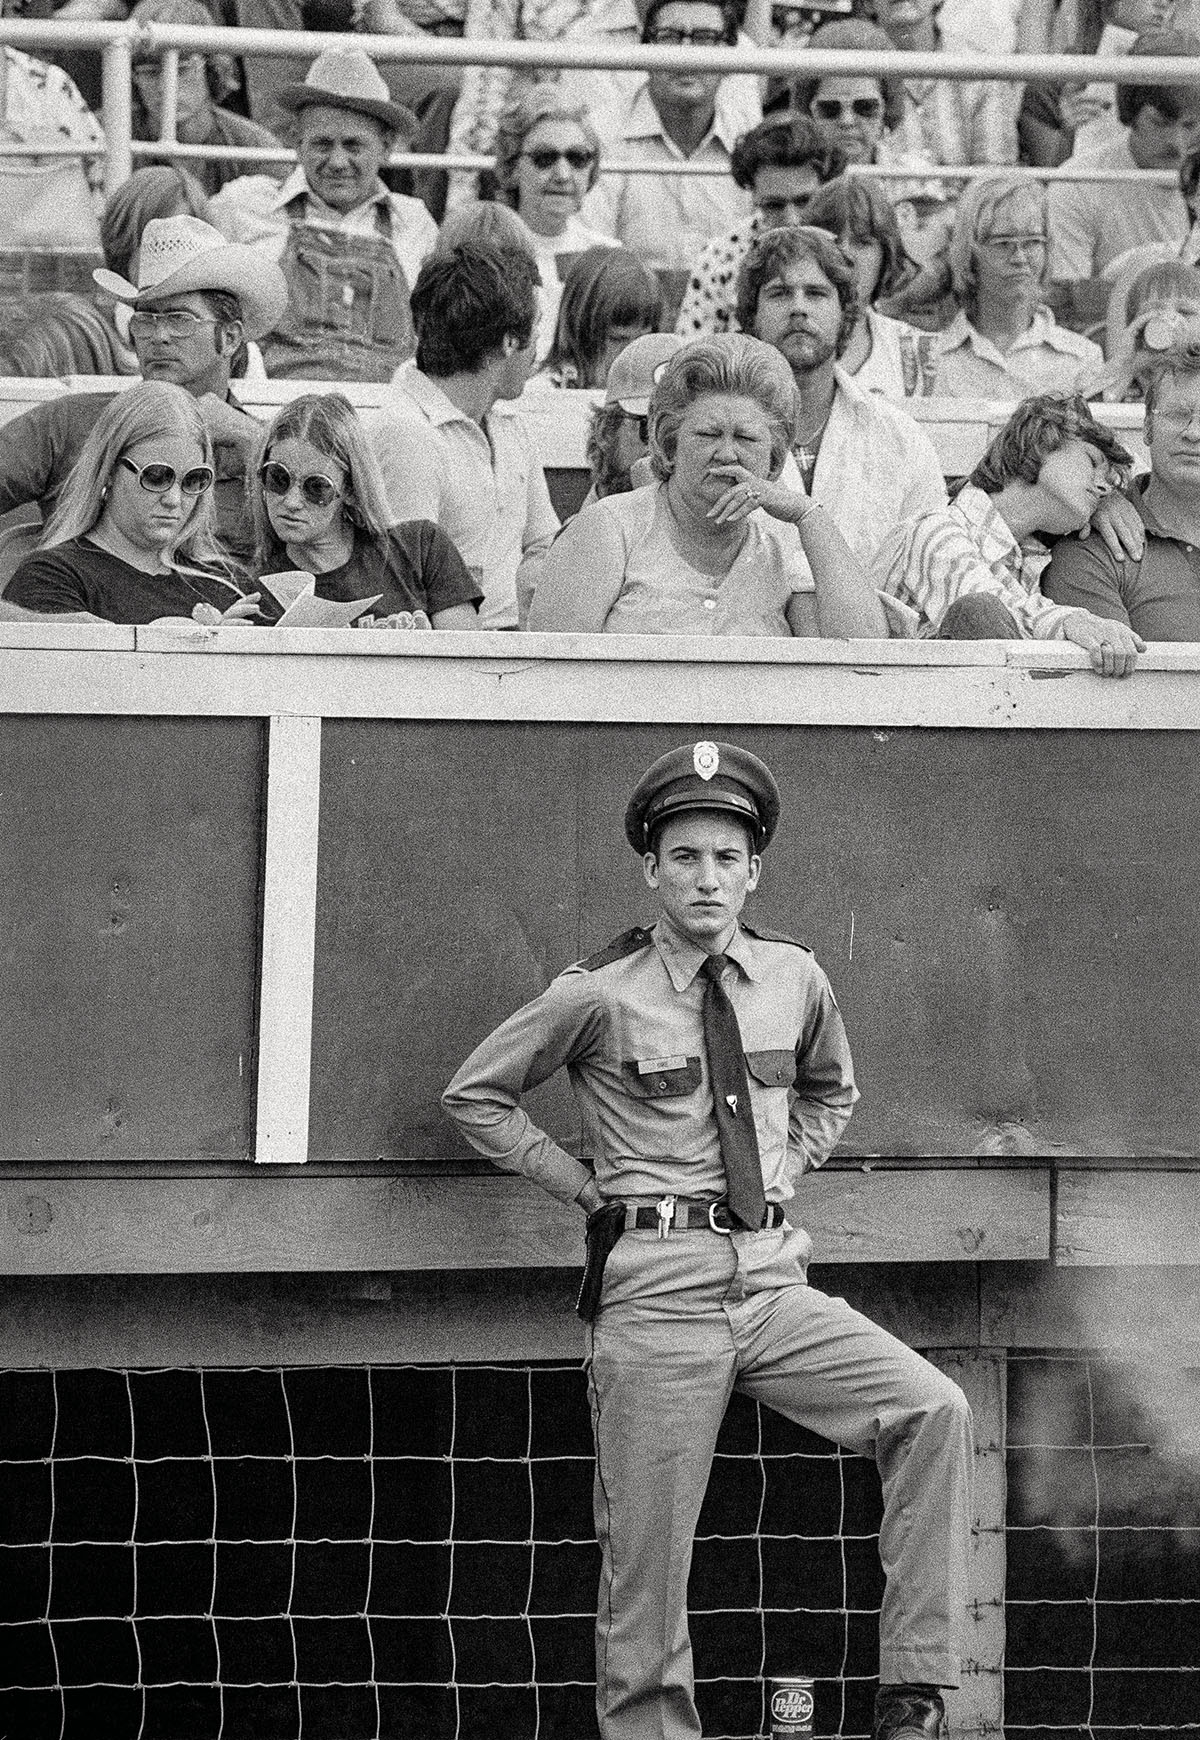 A police officer in his uniform stands in front of a crowd of seated spectators